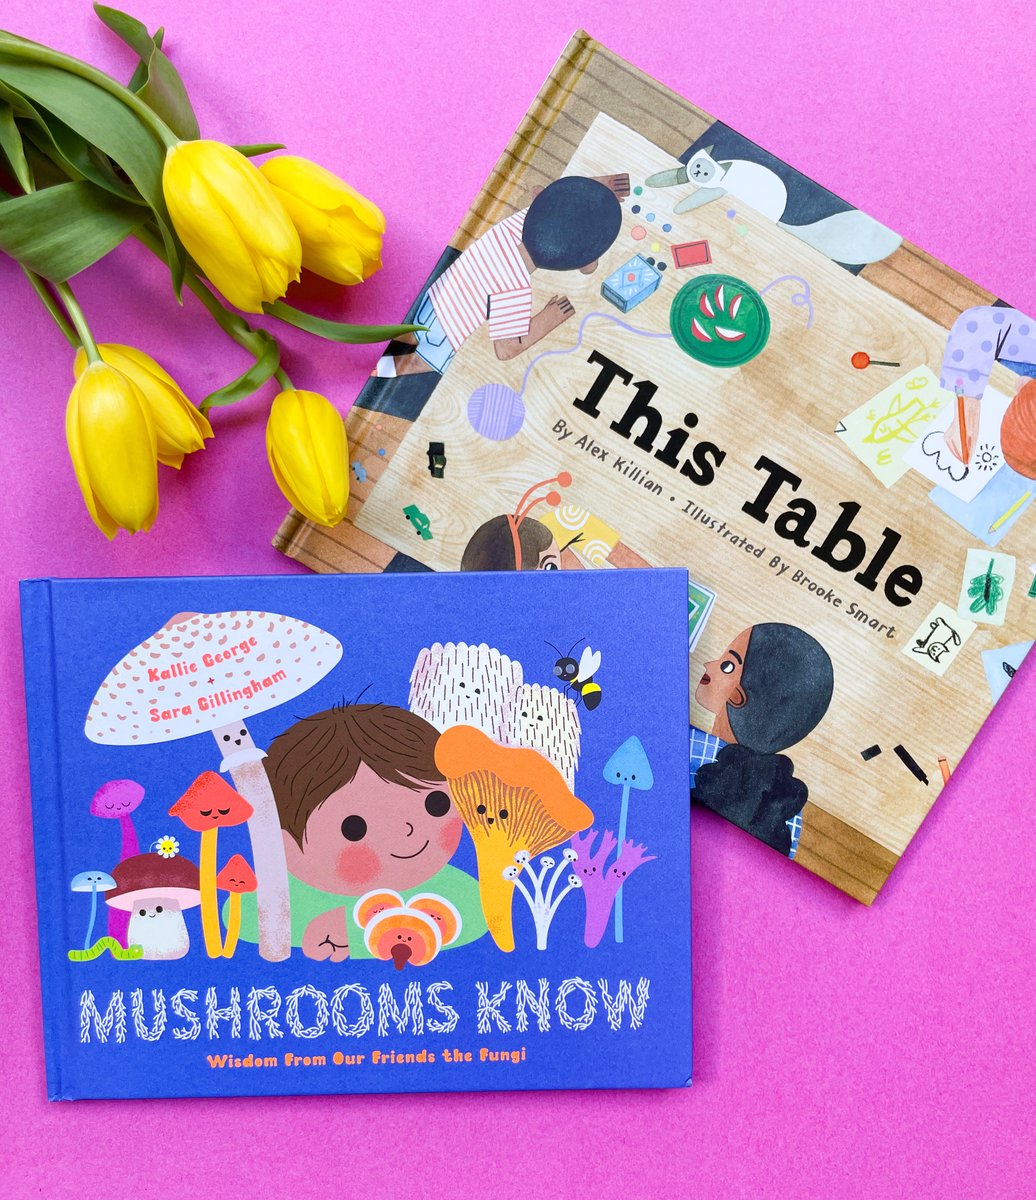 Mushrooms Know and This Table hit the shelves today! Which one are you going to read first? 🍄💫 #picturebooks #newbooks